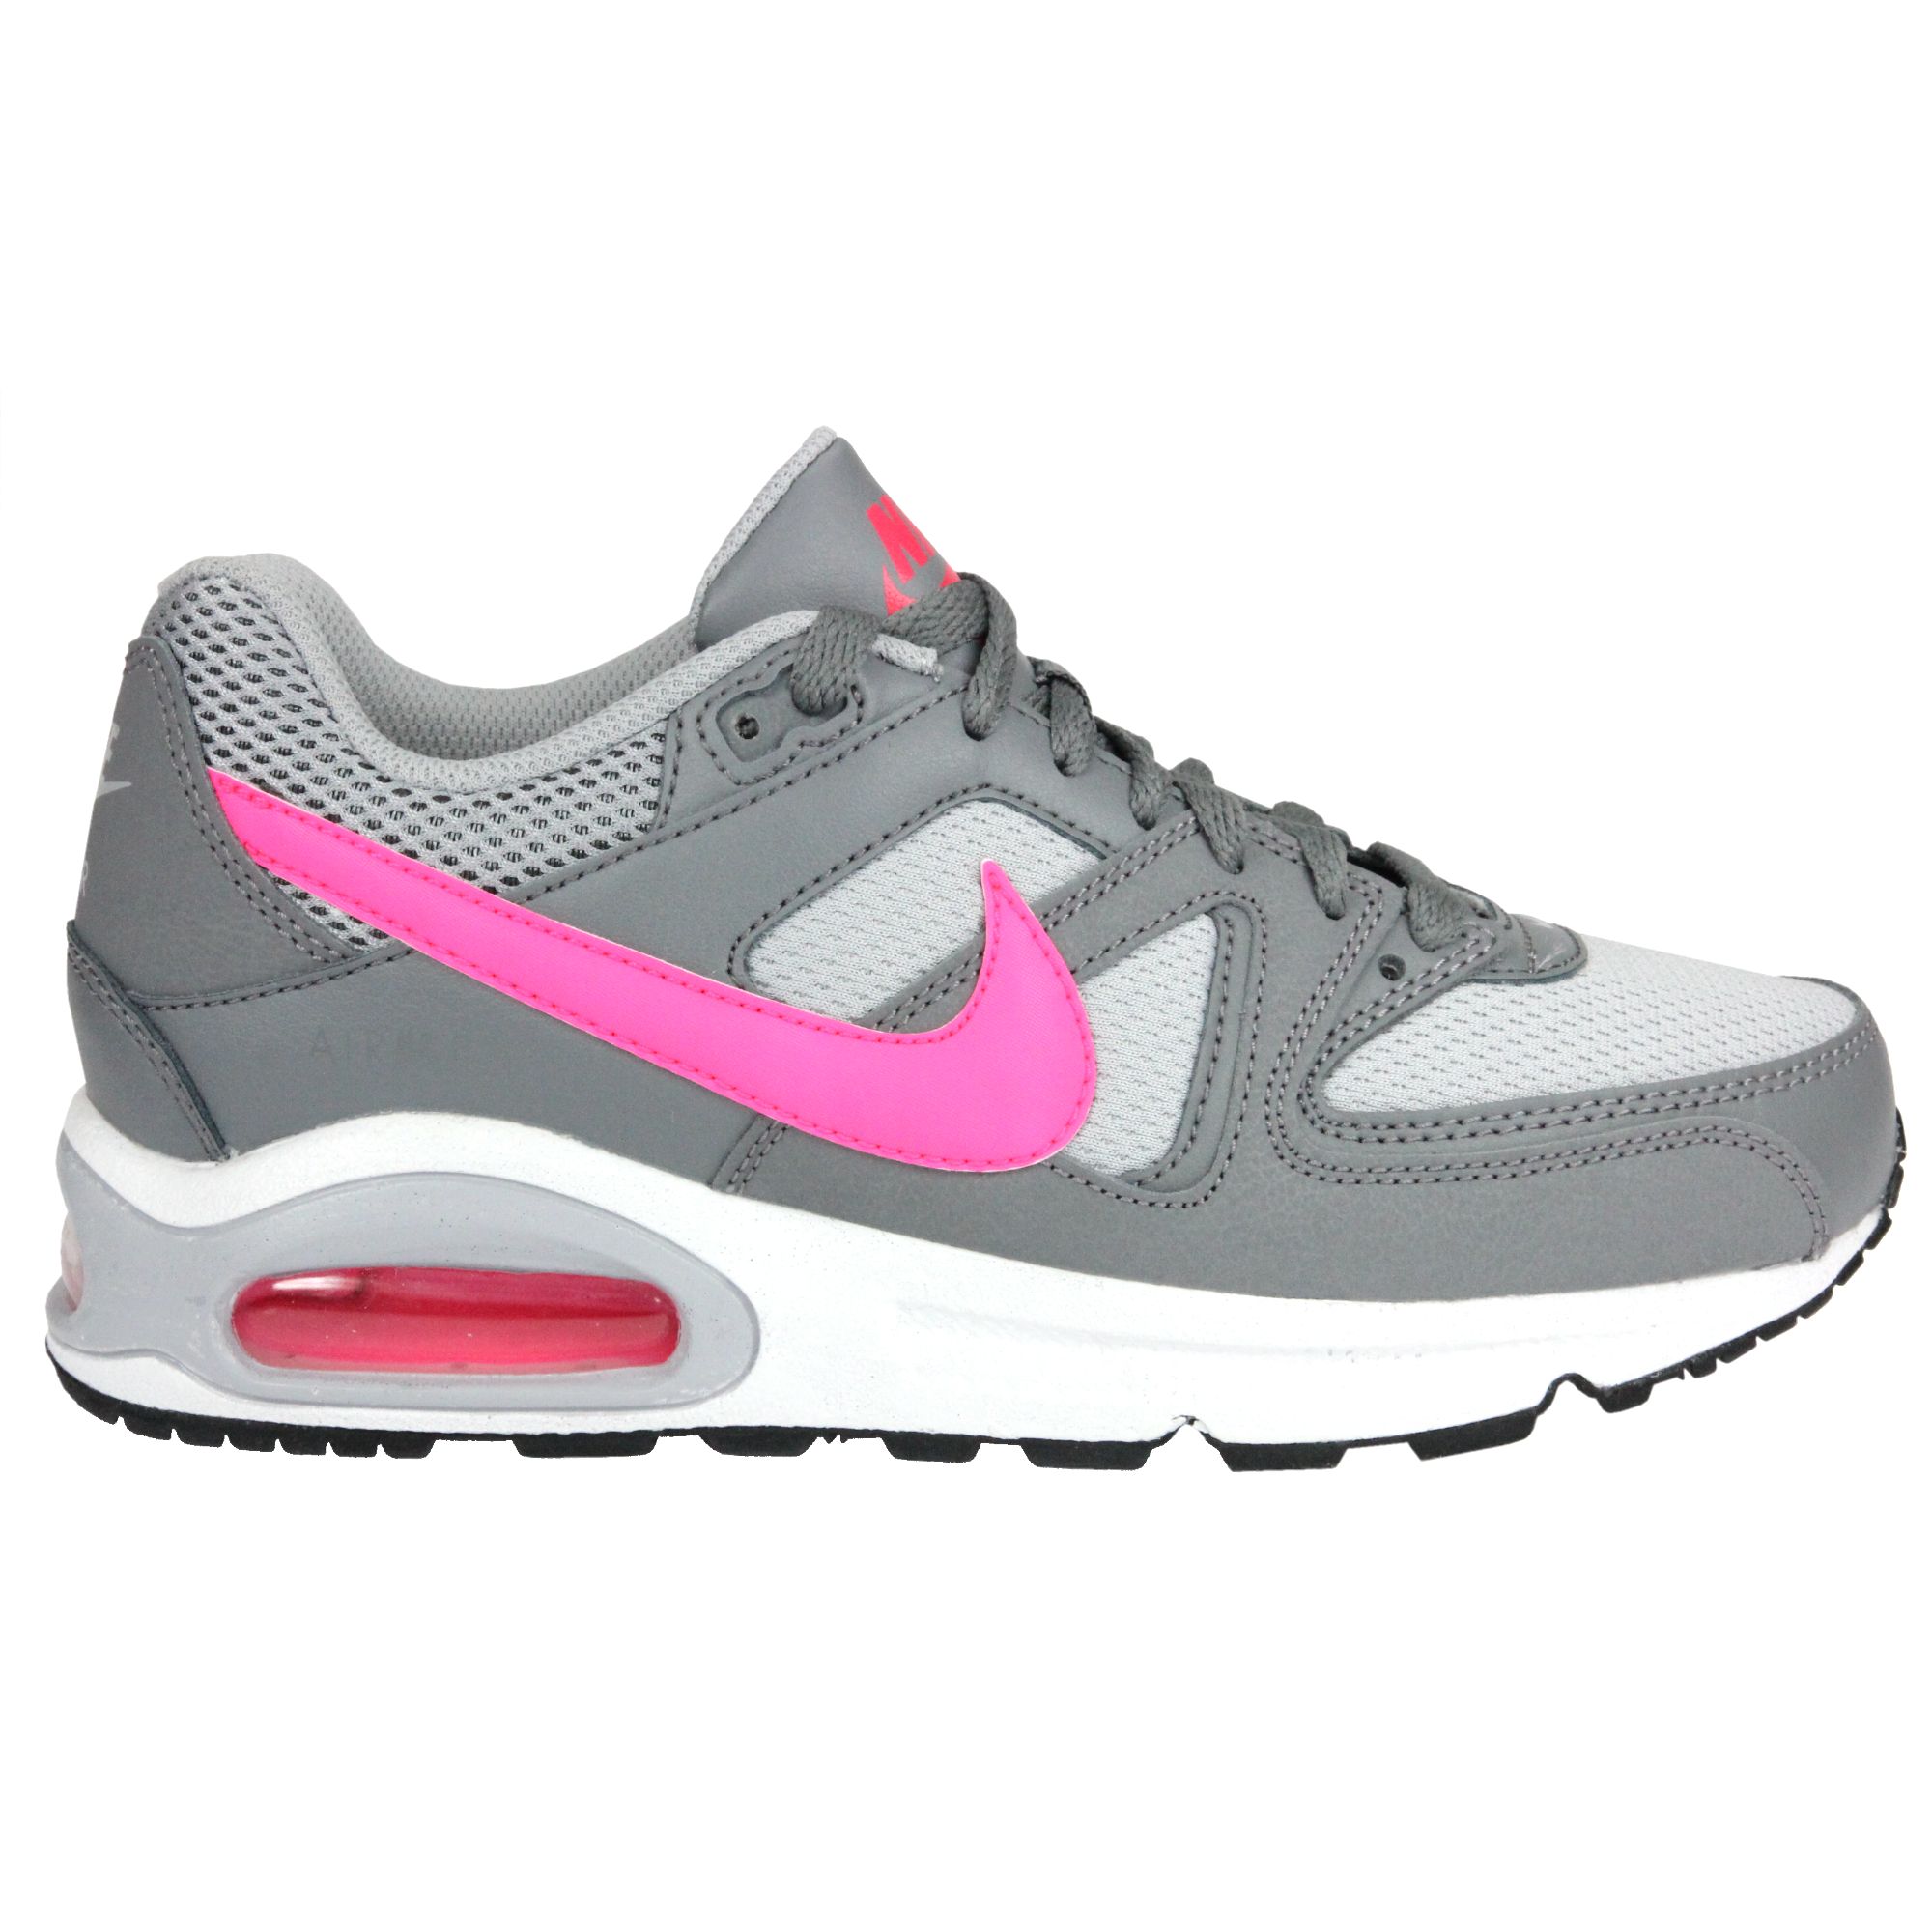 Nike Air Max Command Femme, Boutique Nike Air Max Command Femme Jsatt Reduction Sold[666-8O8-2334]